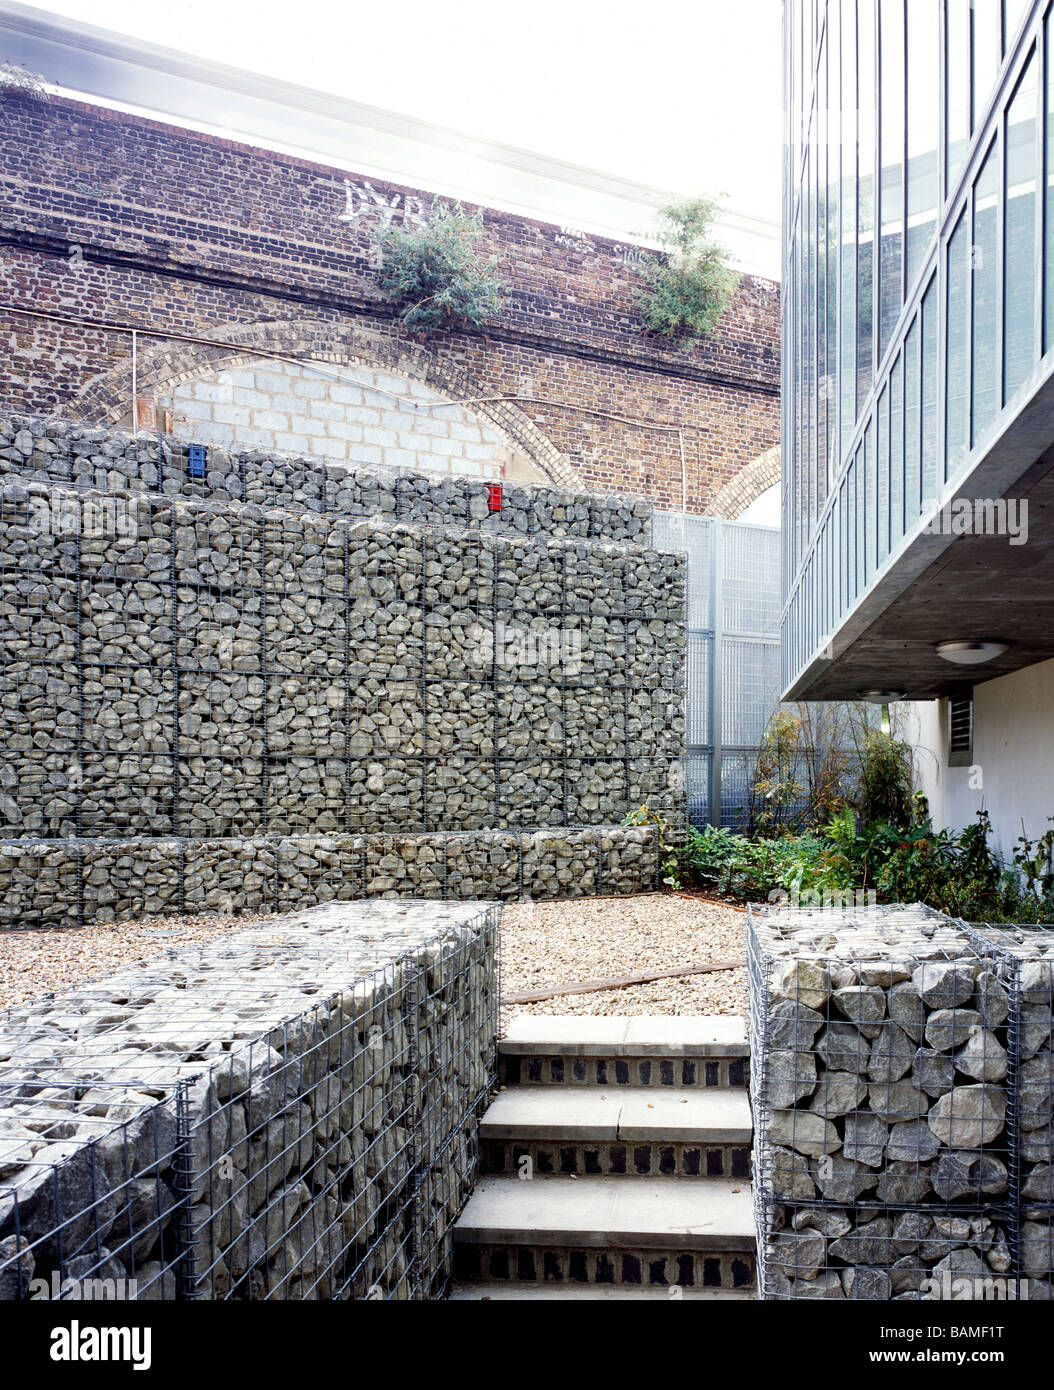 Consort Road Housing, London, United Kingdom, Walter Menteth Architects, Consort road housing exterior view - inner courtyard Stock Photo